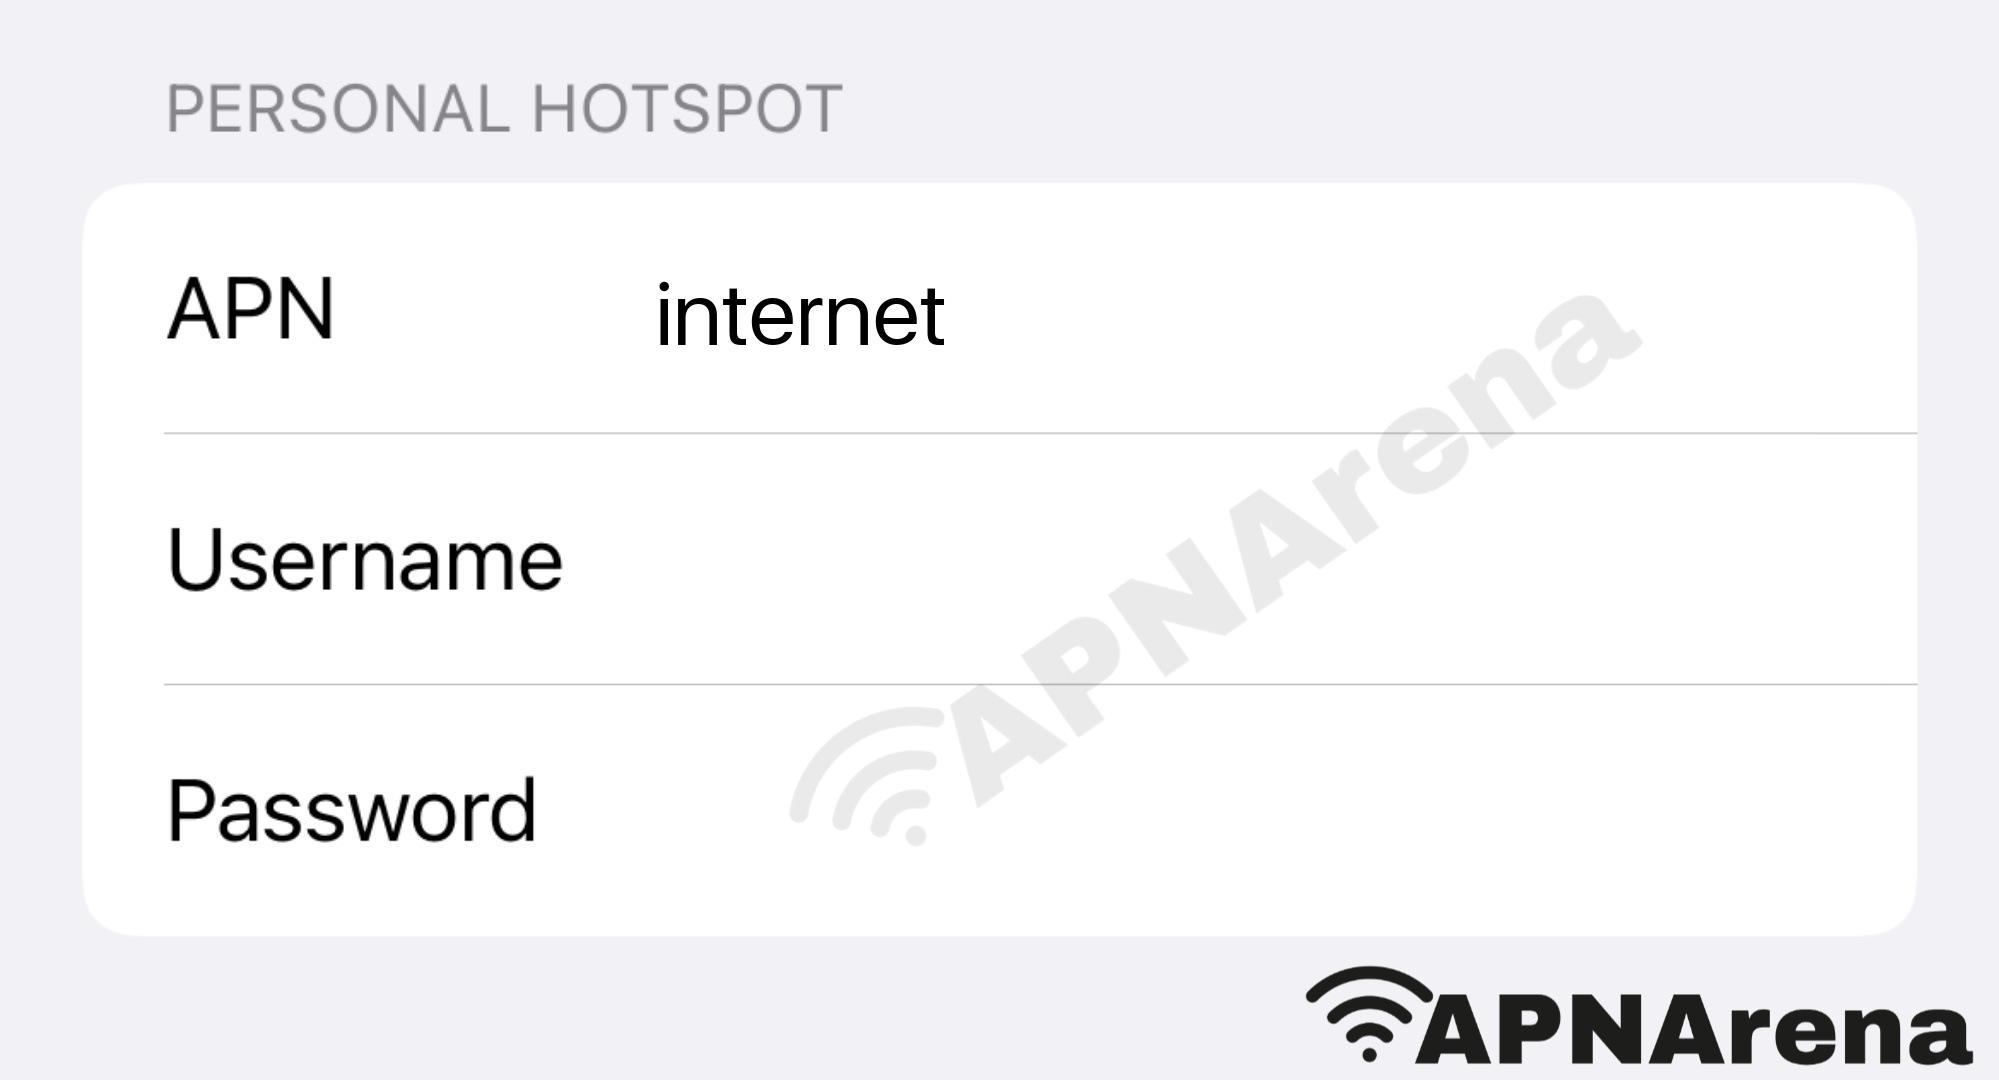 giffgaff Personal Hotspot Settings for iPhone